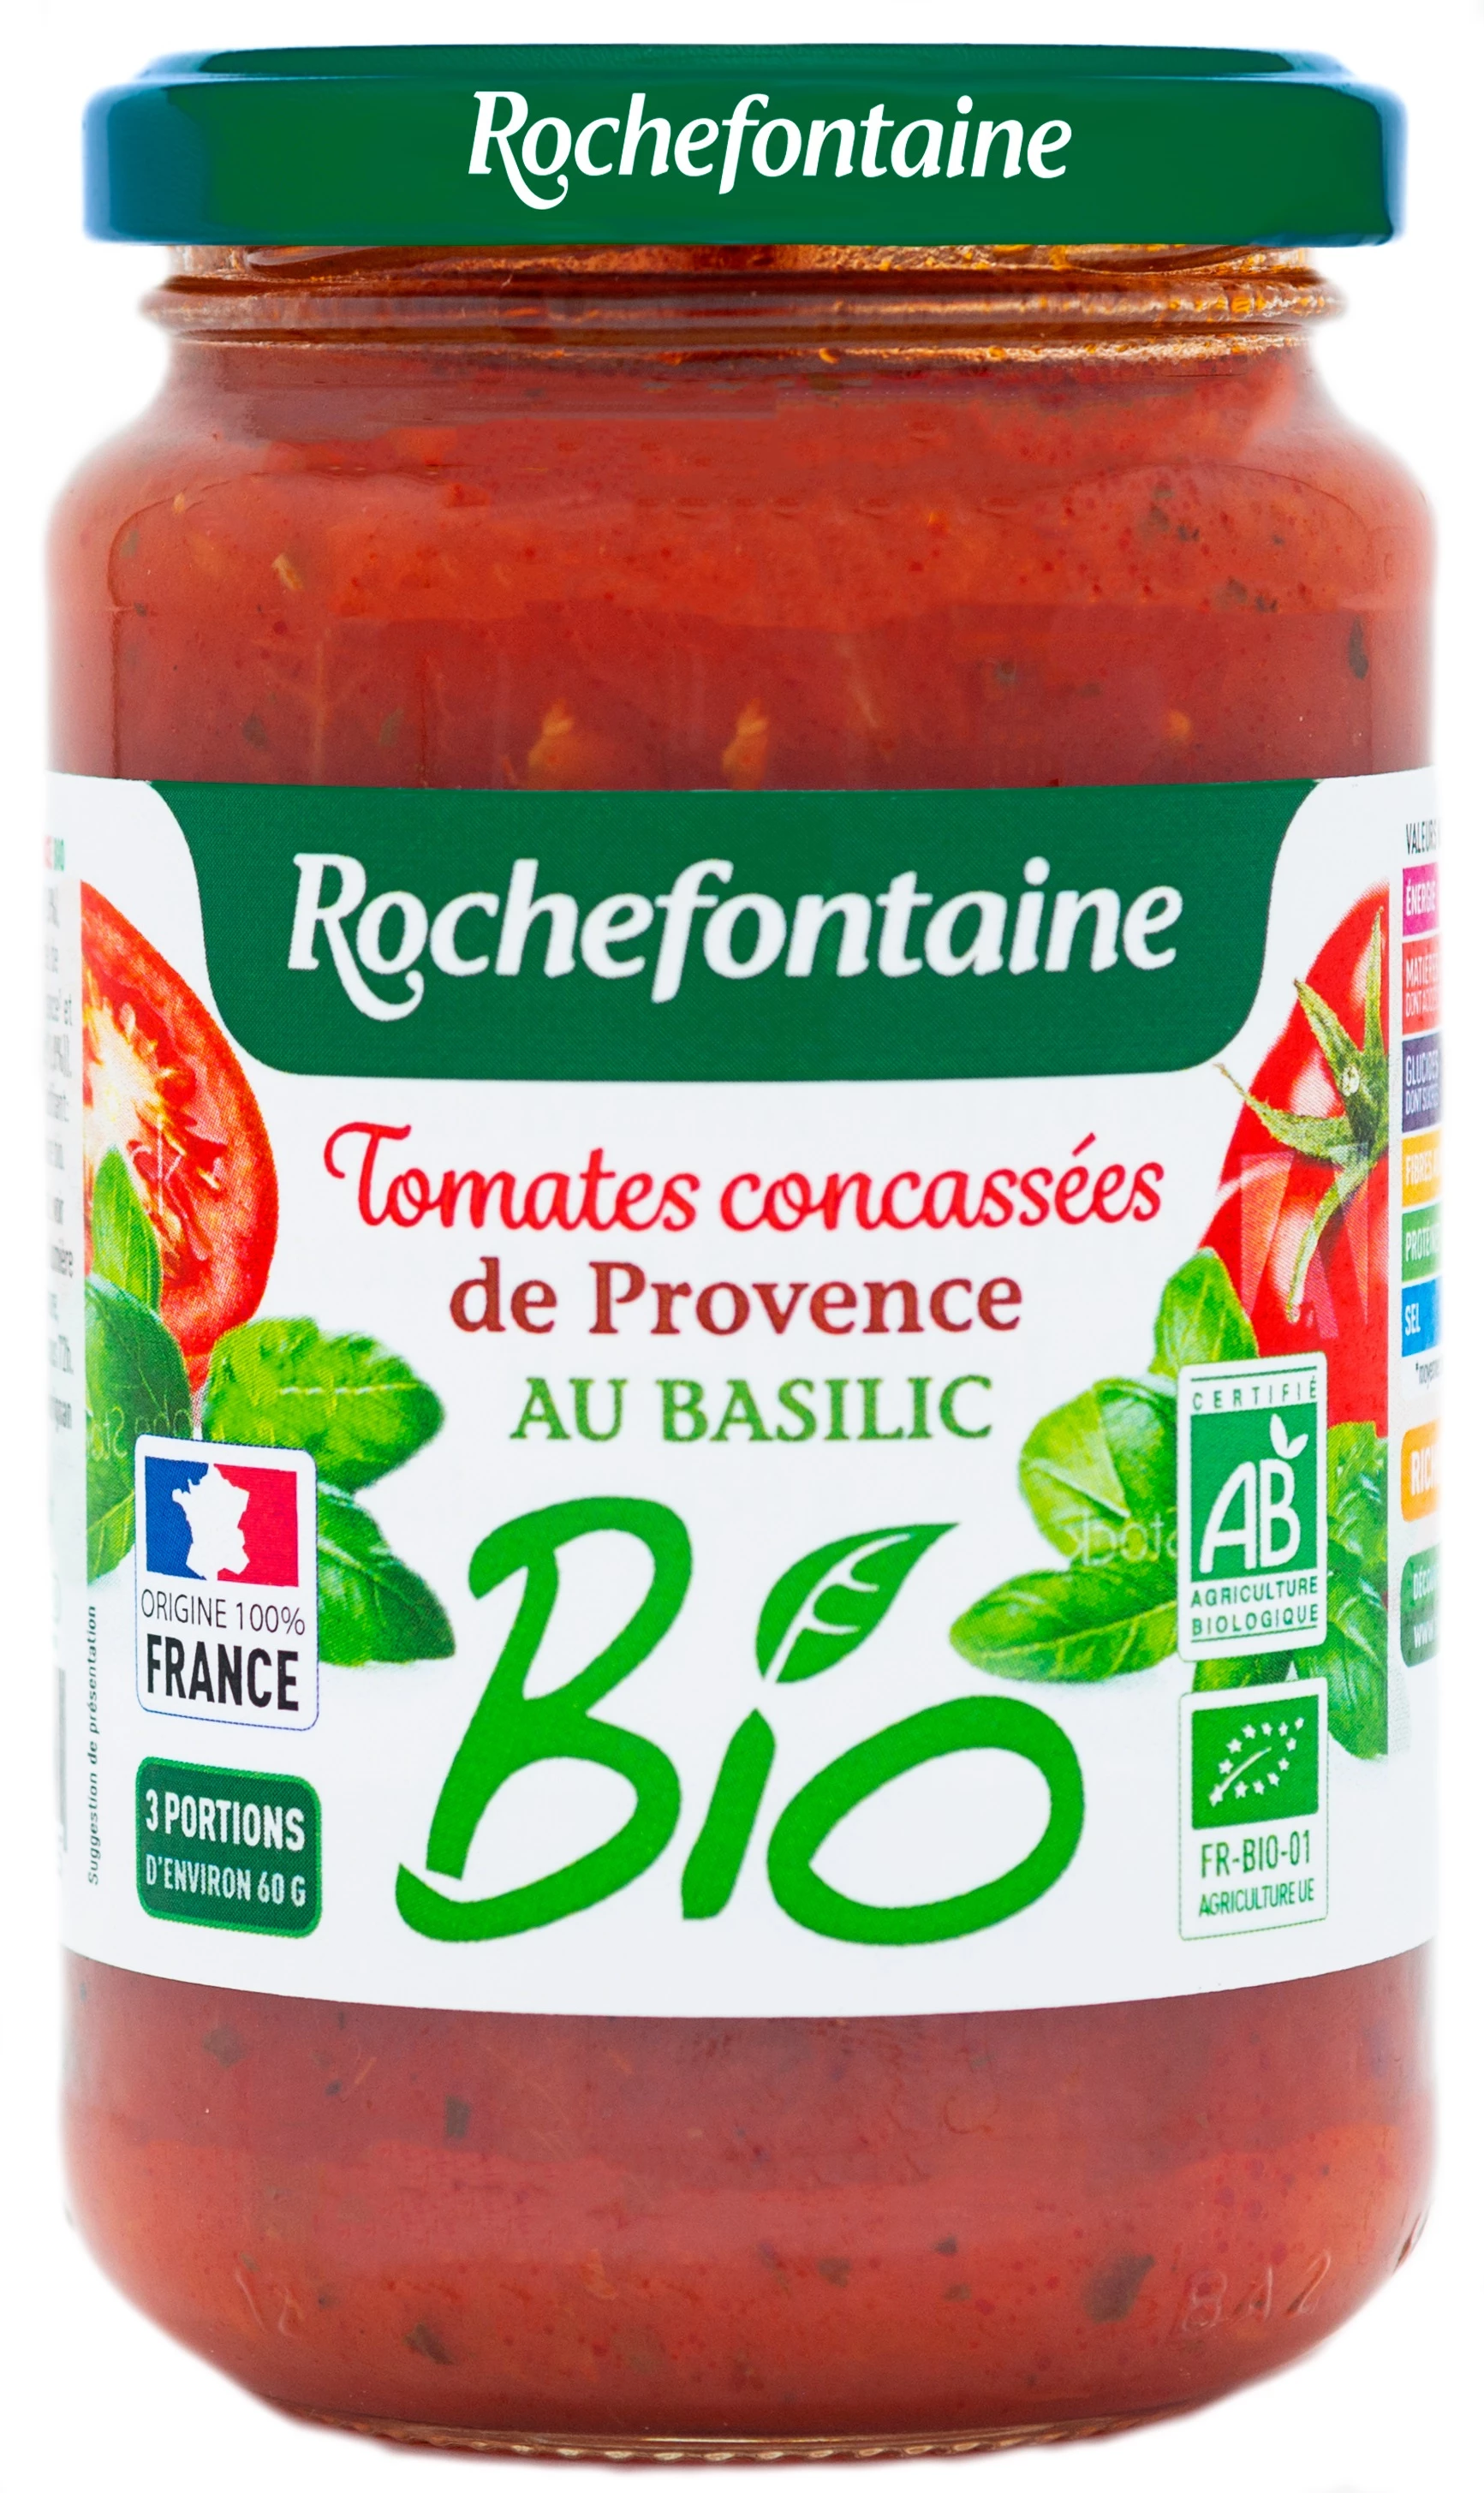 Crushed tomatoes of Provence with organic basil - ROCHEFONTAINE